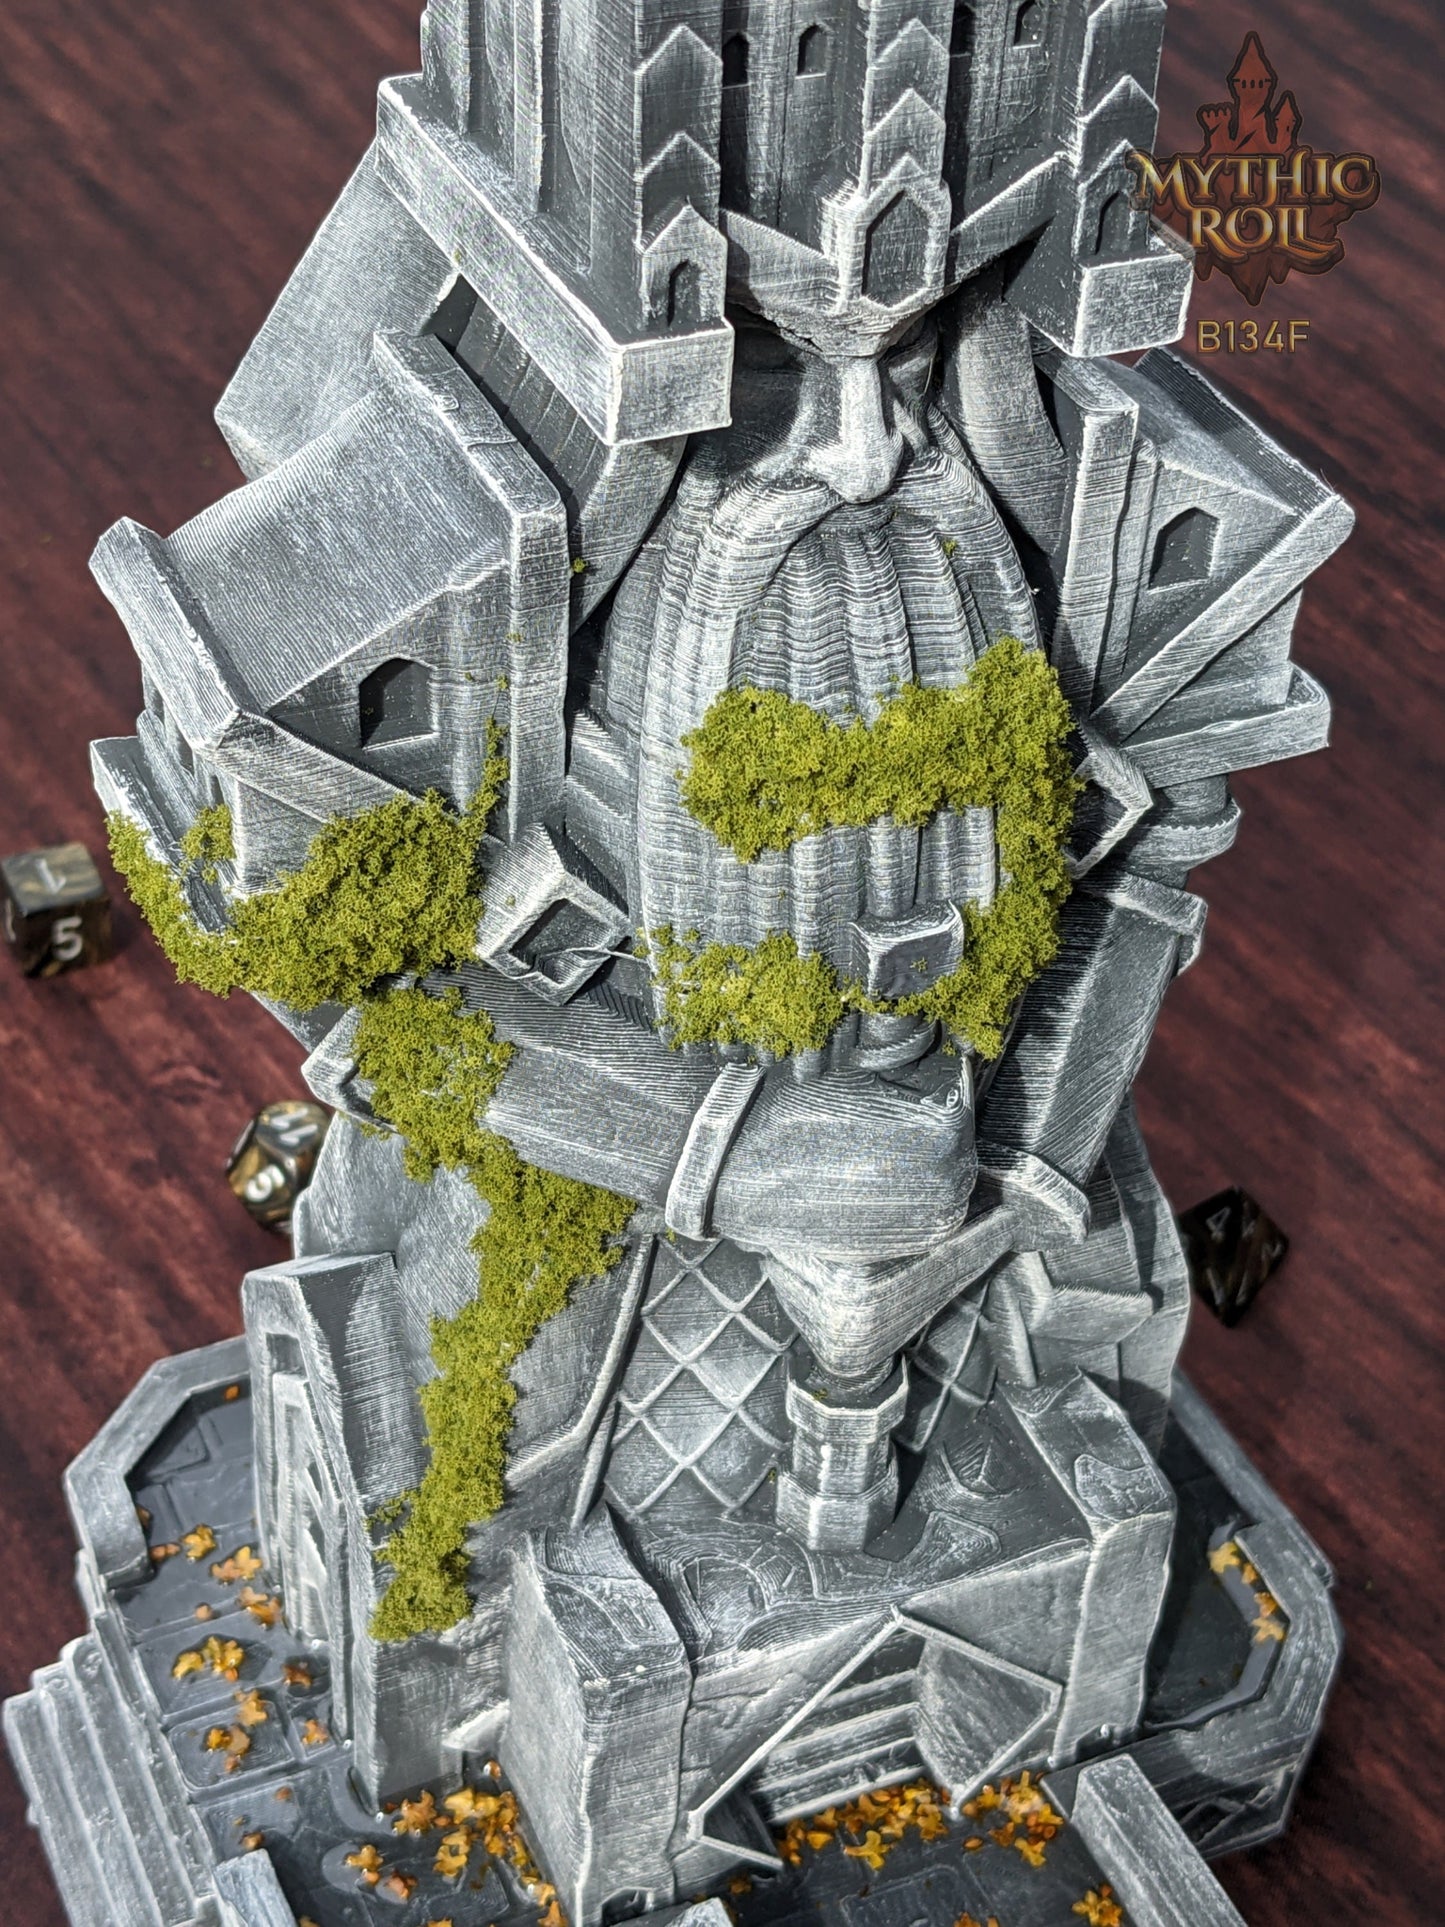 Dwarven Dice Tower - Baldur's Shrine by Unchained Games - Mythic Roll - Carve Your Fate in Stone with Ancestral Echoes and Stout Valor.